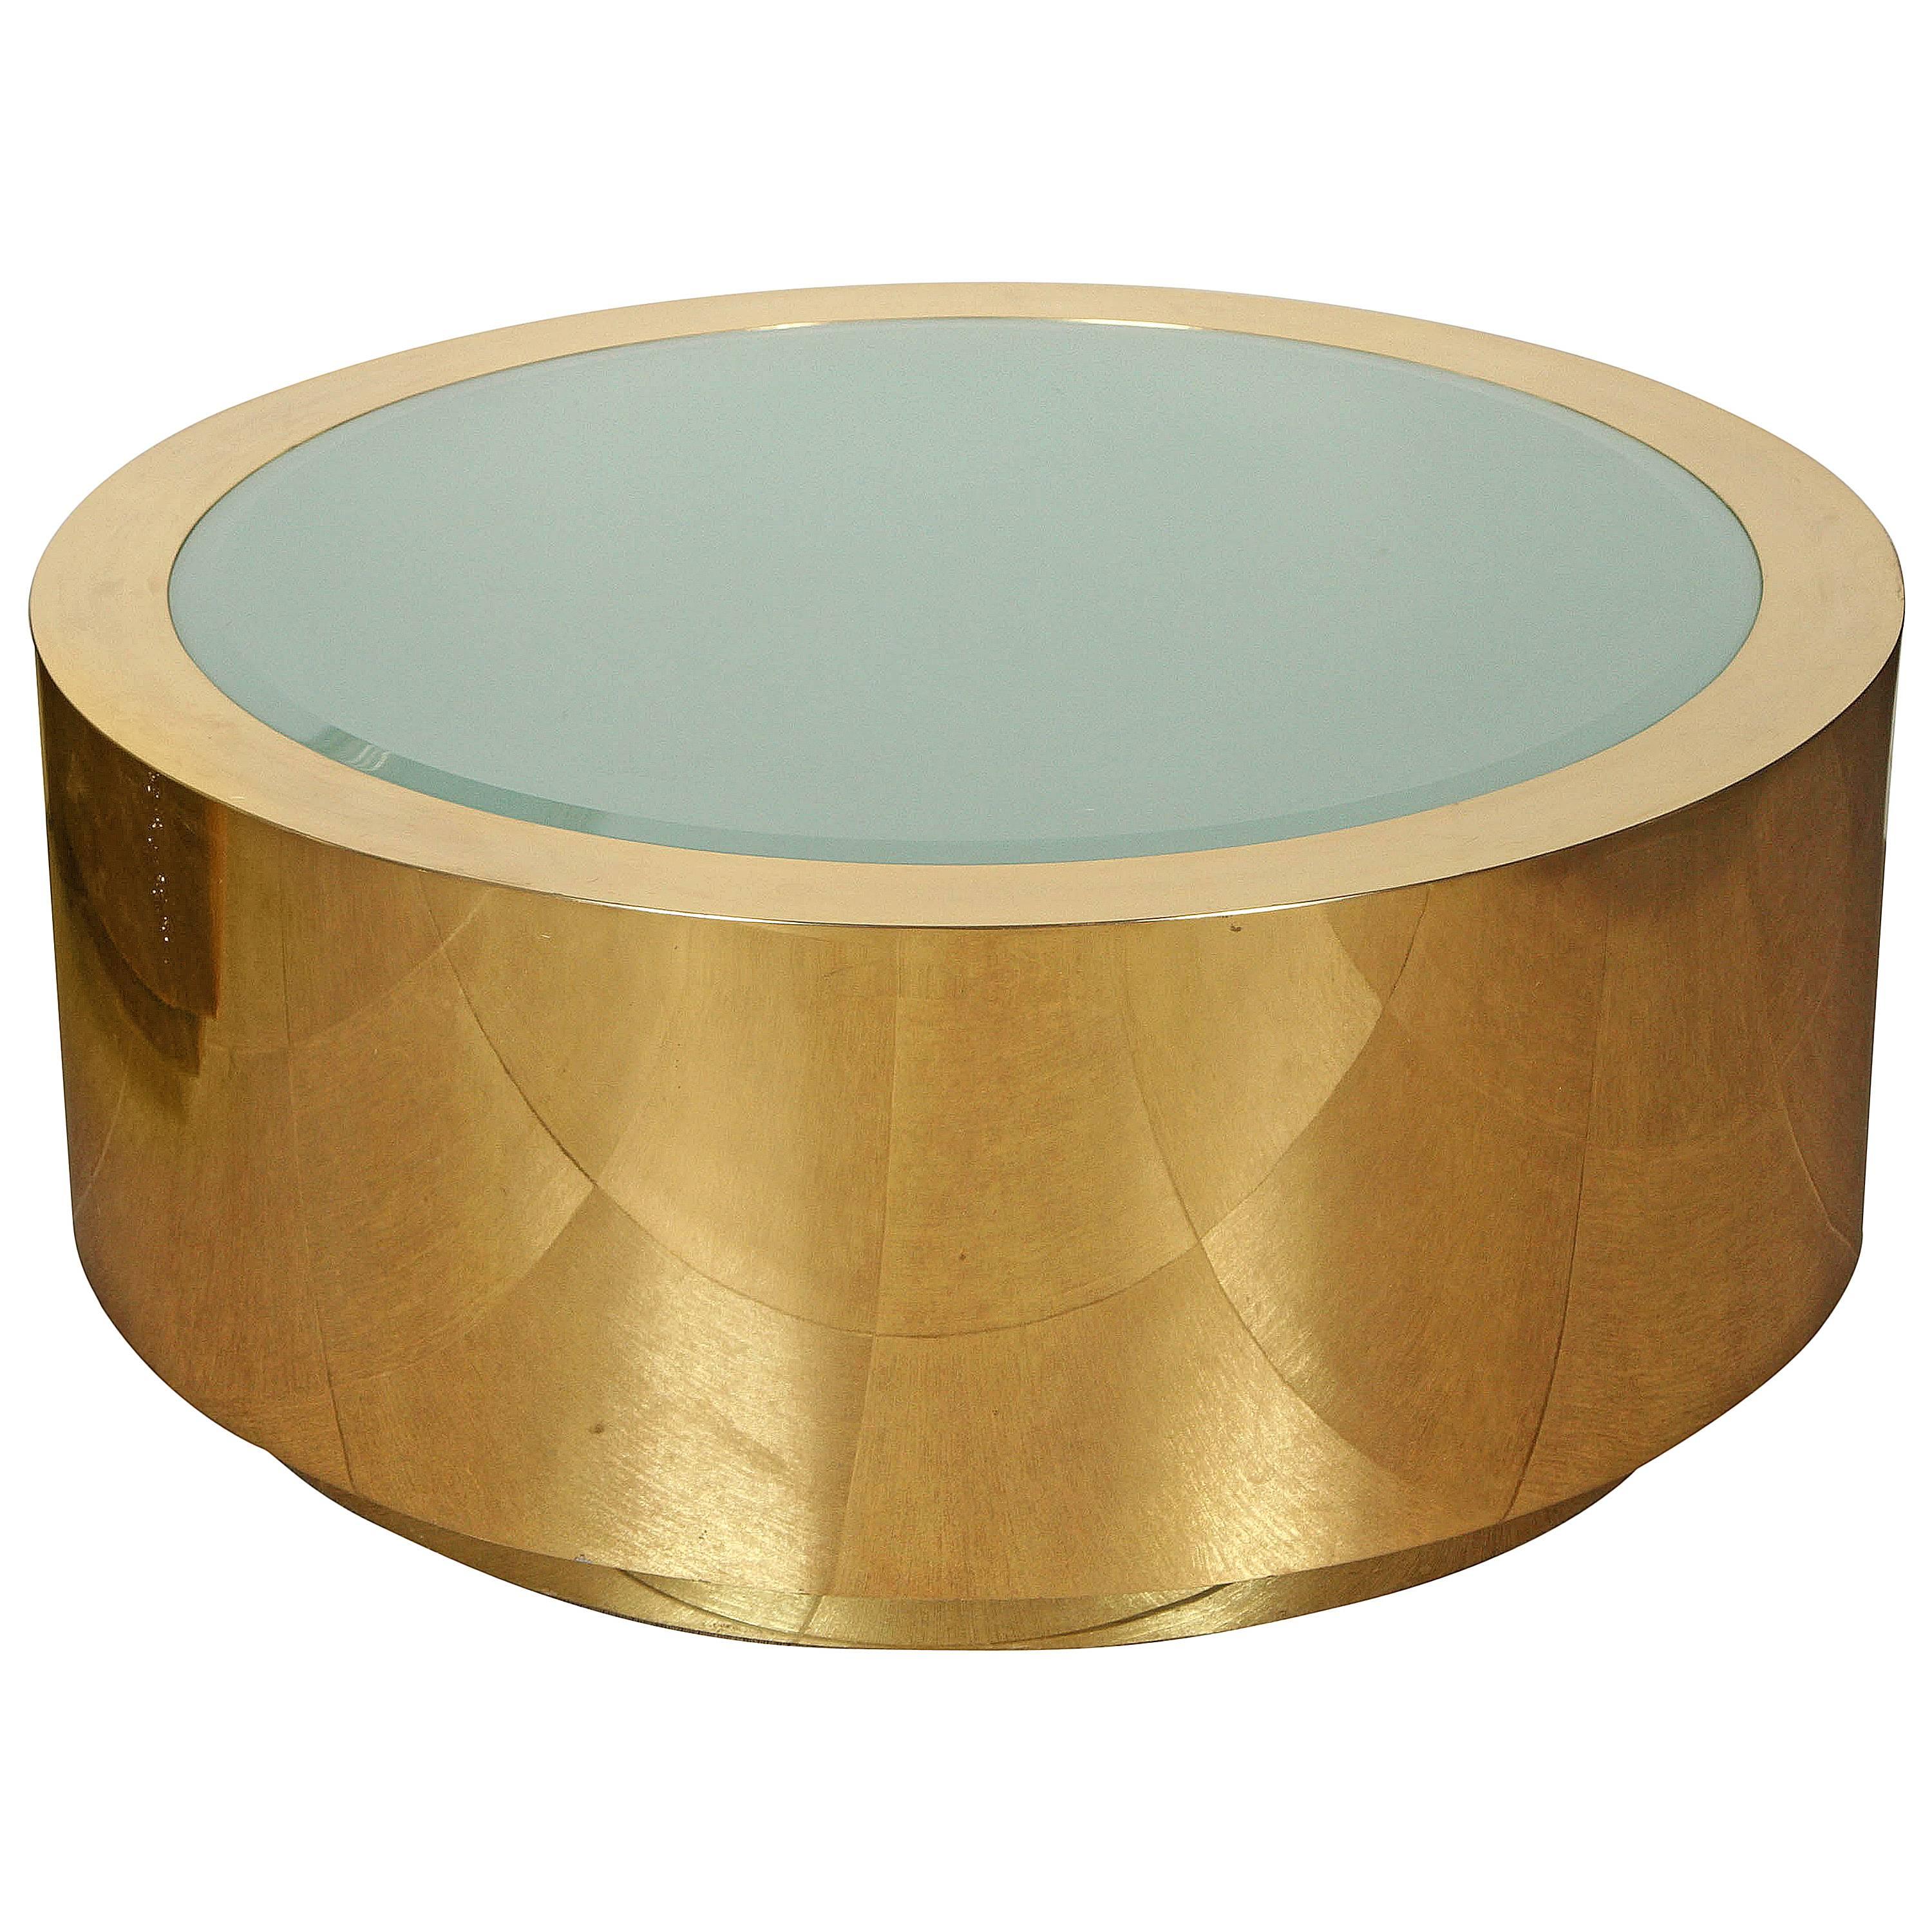 Stunning coffee table of polished brass and etched glass by Steve Chase